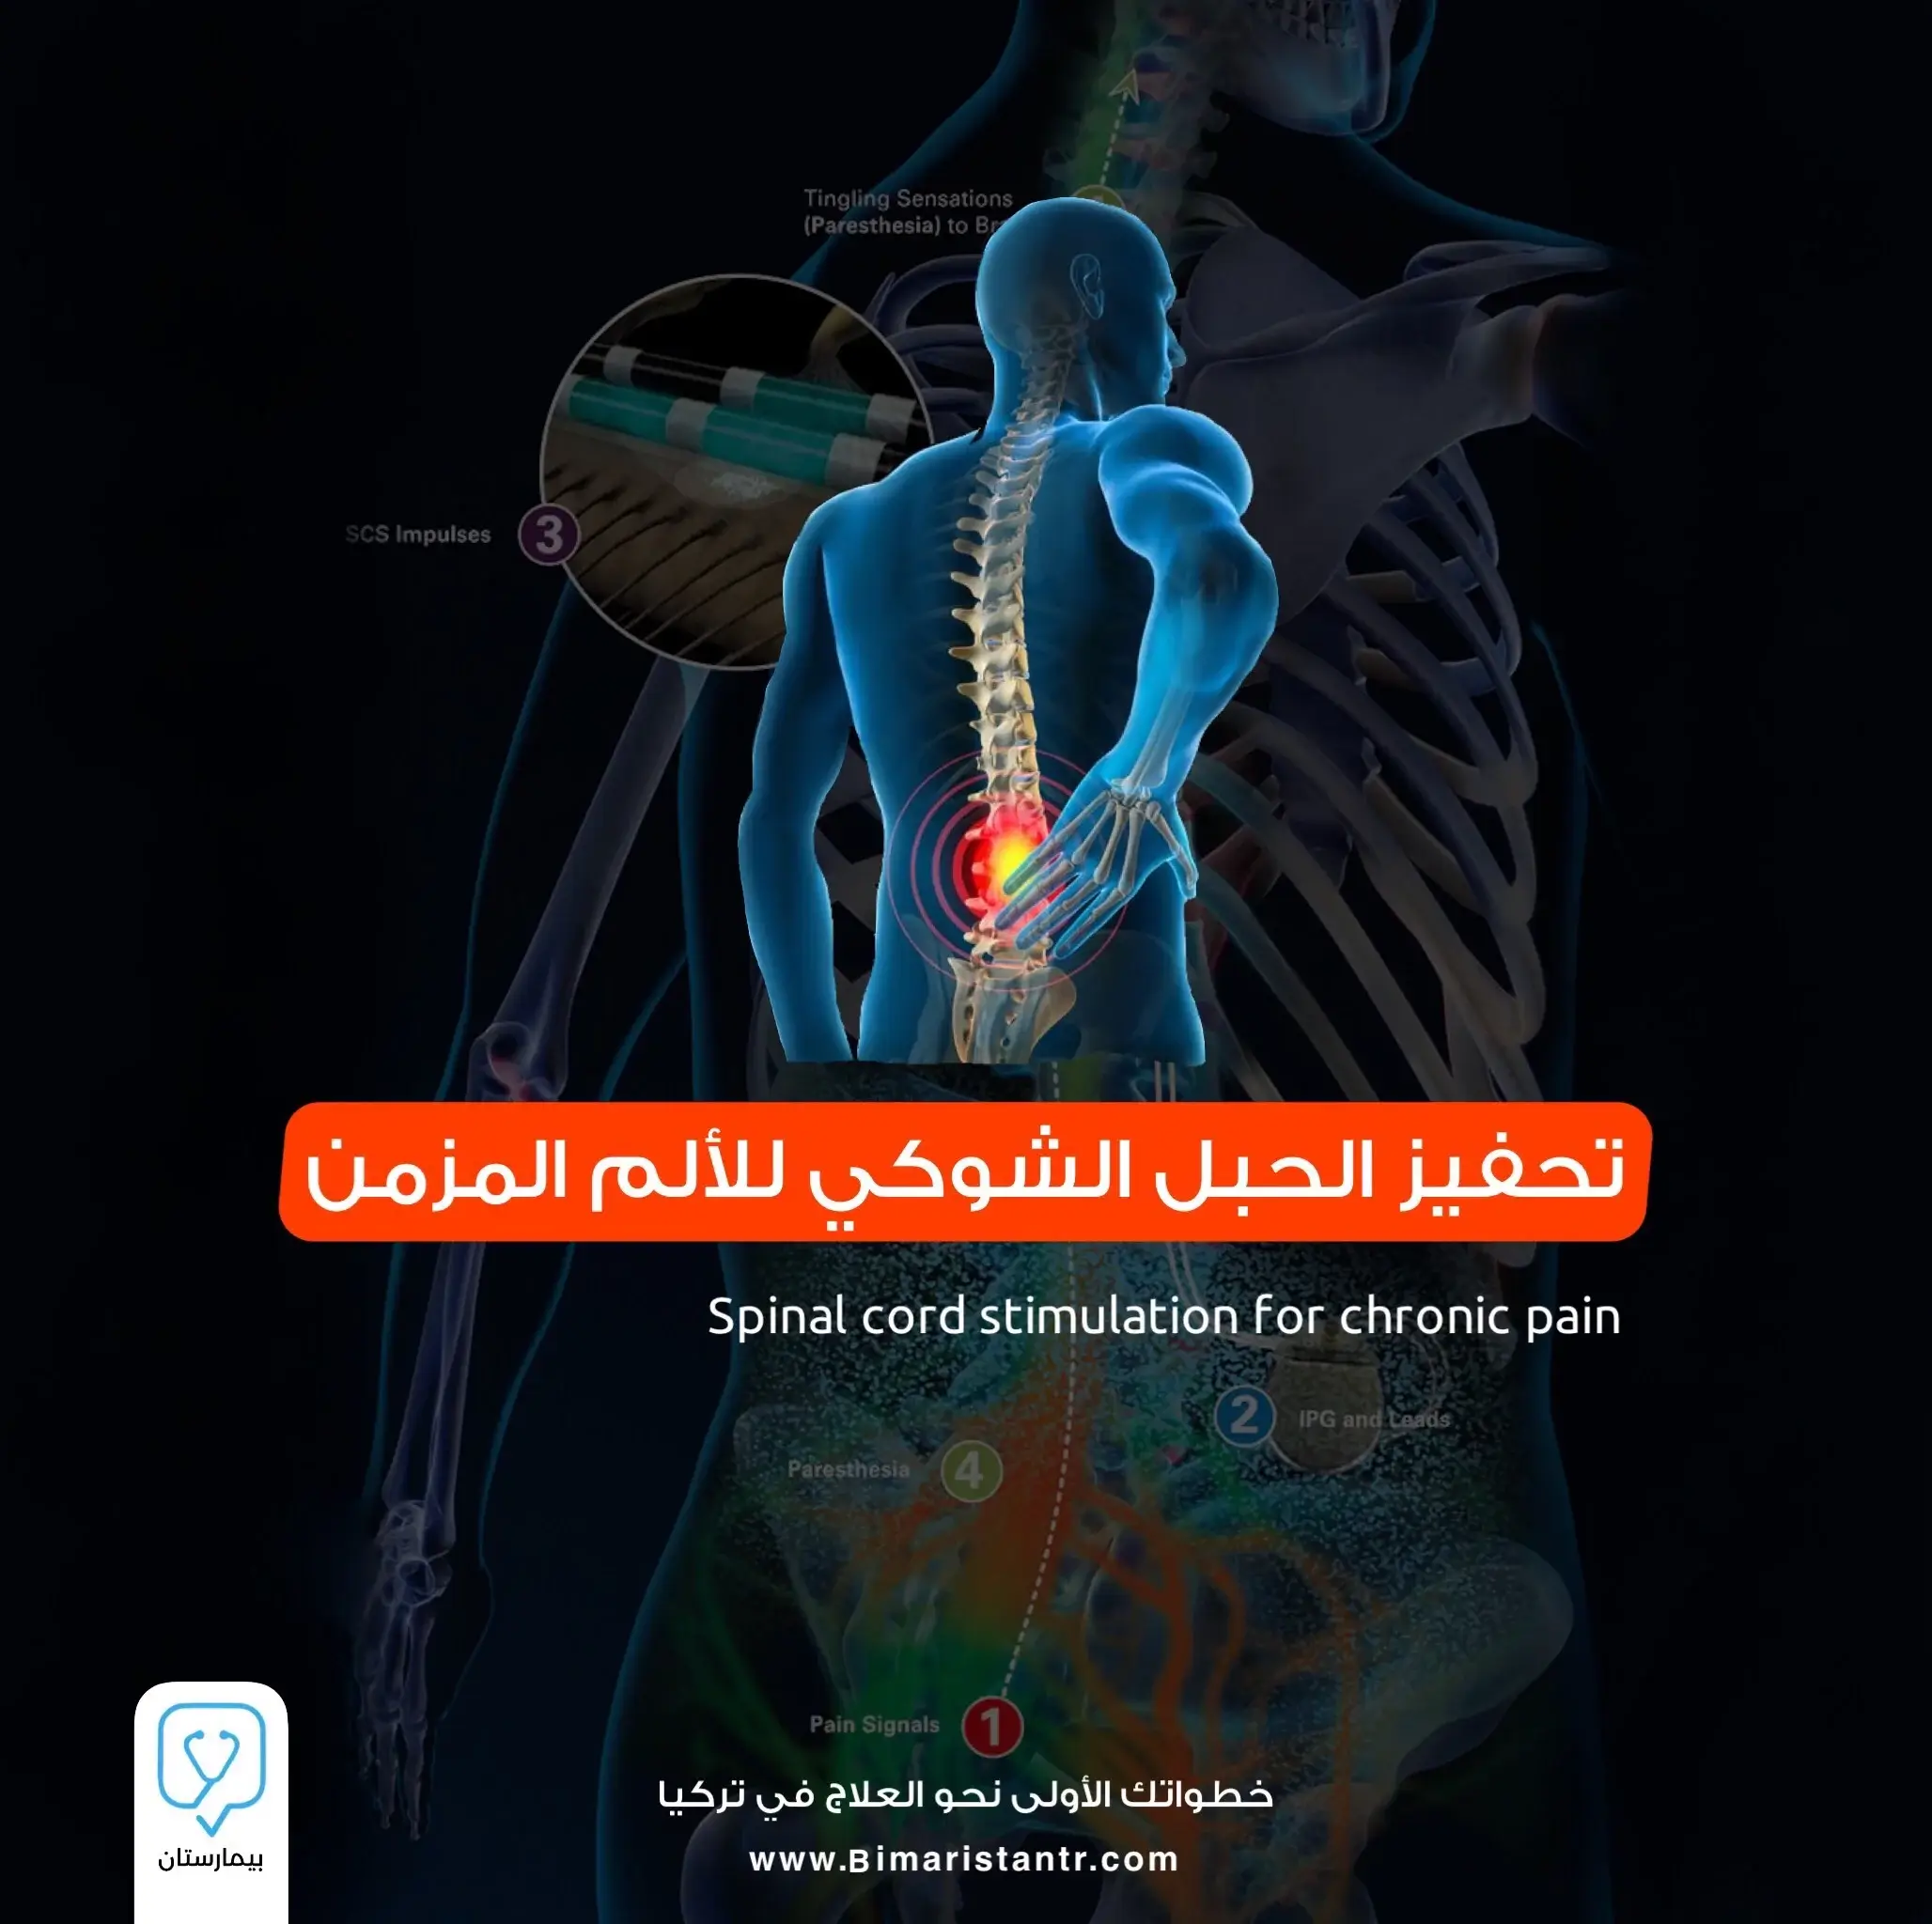 Spinal Cord Stimulation for Chronic Pain in Turkey